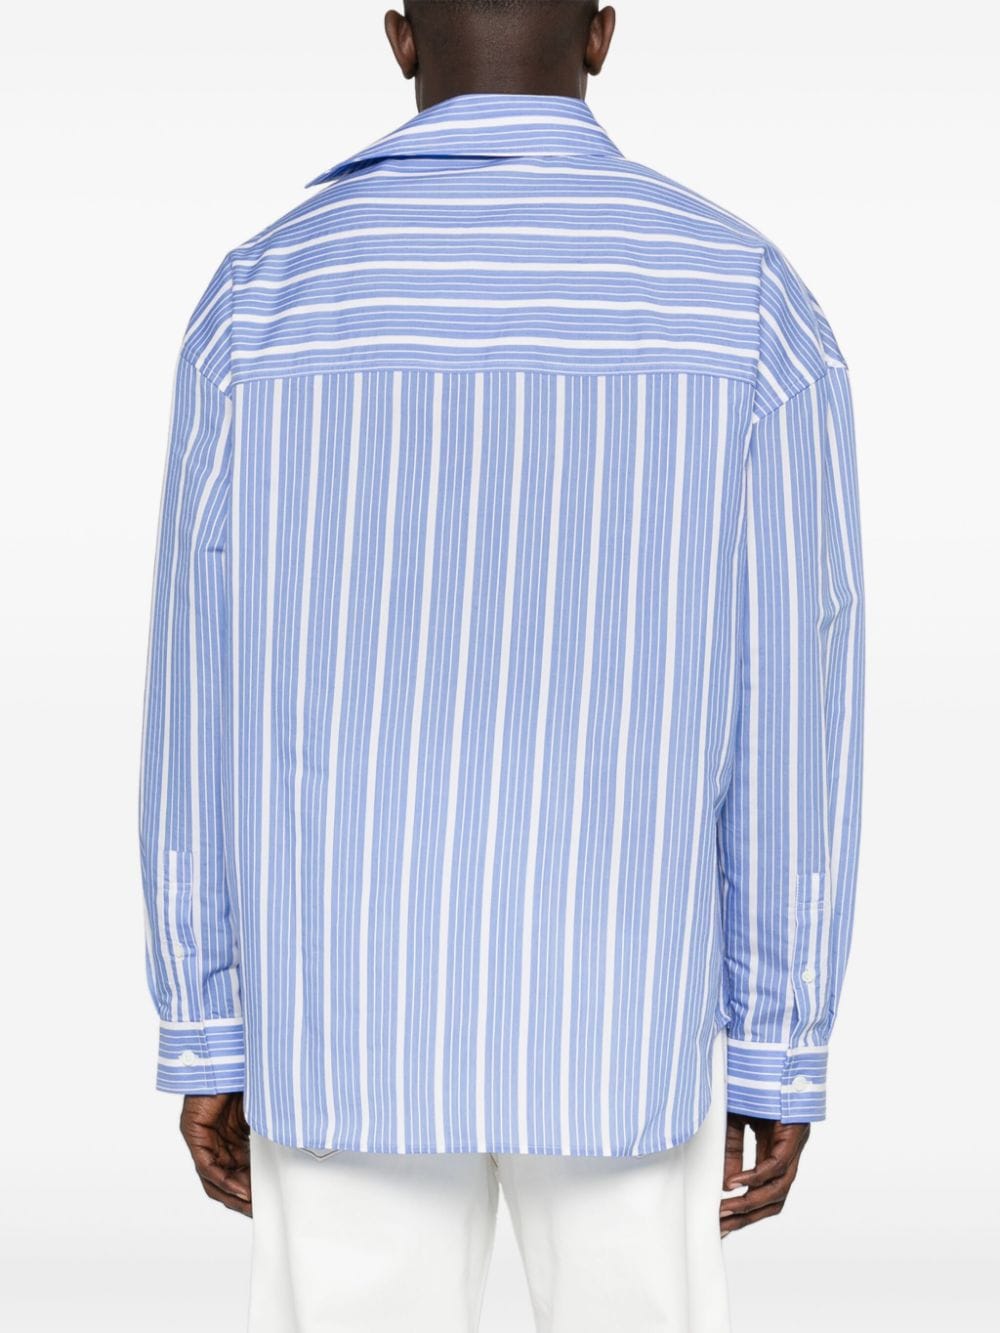 JACQUEMUS Men's Blue and White Striped Long Sleeve Shirt